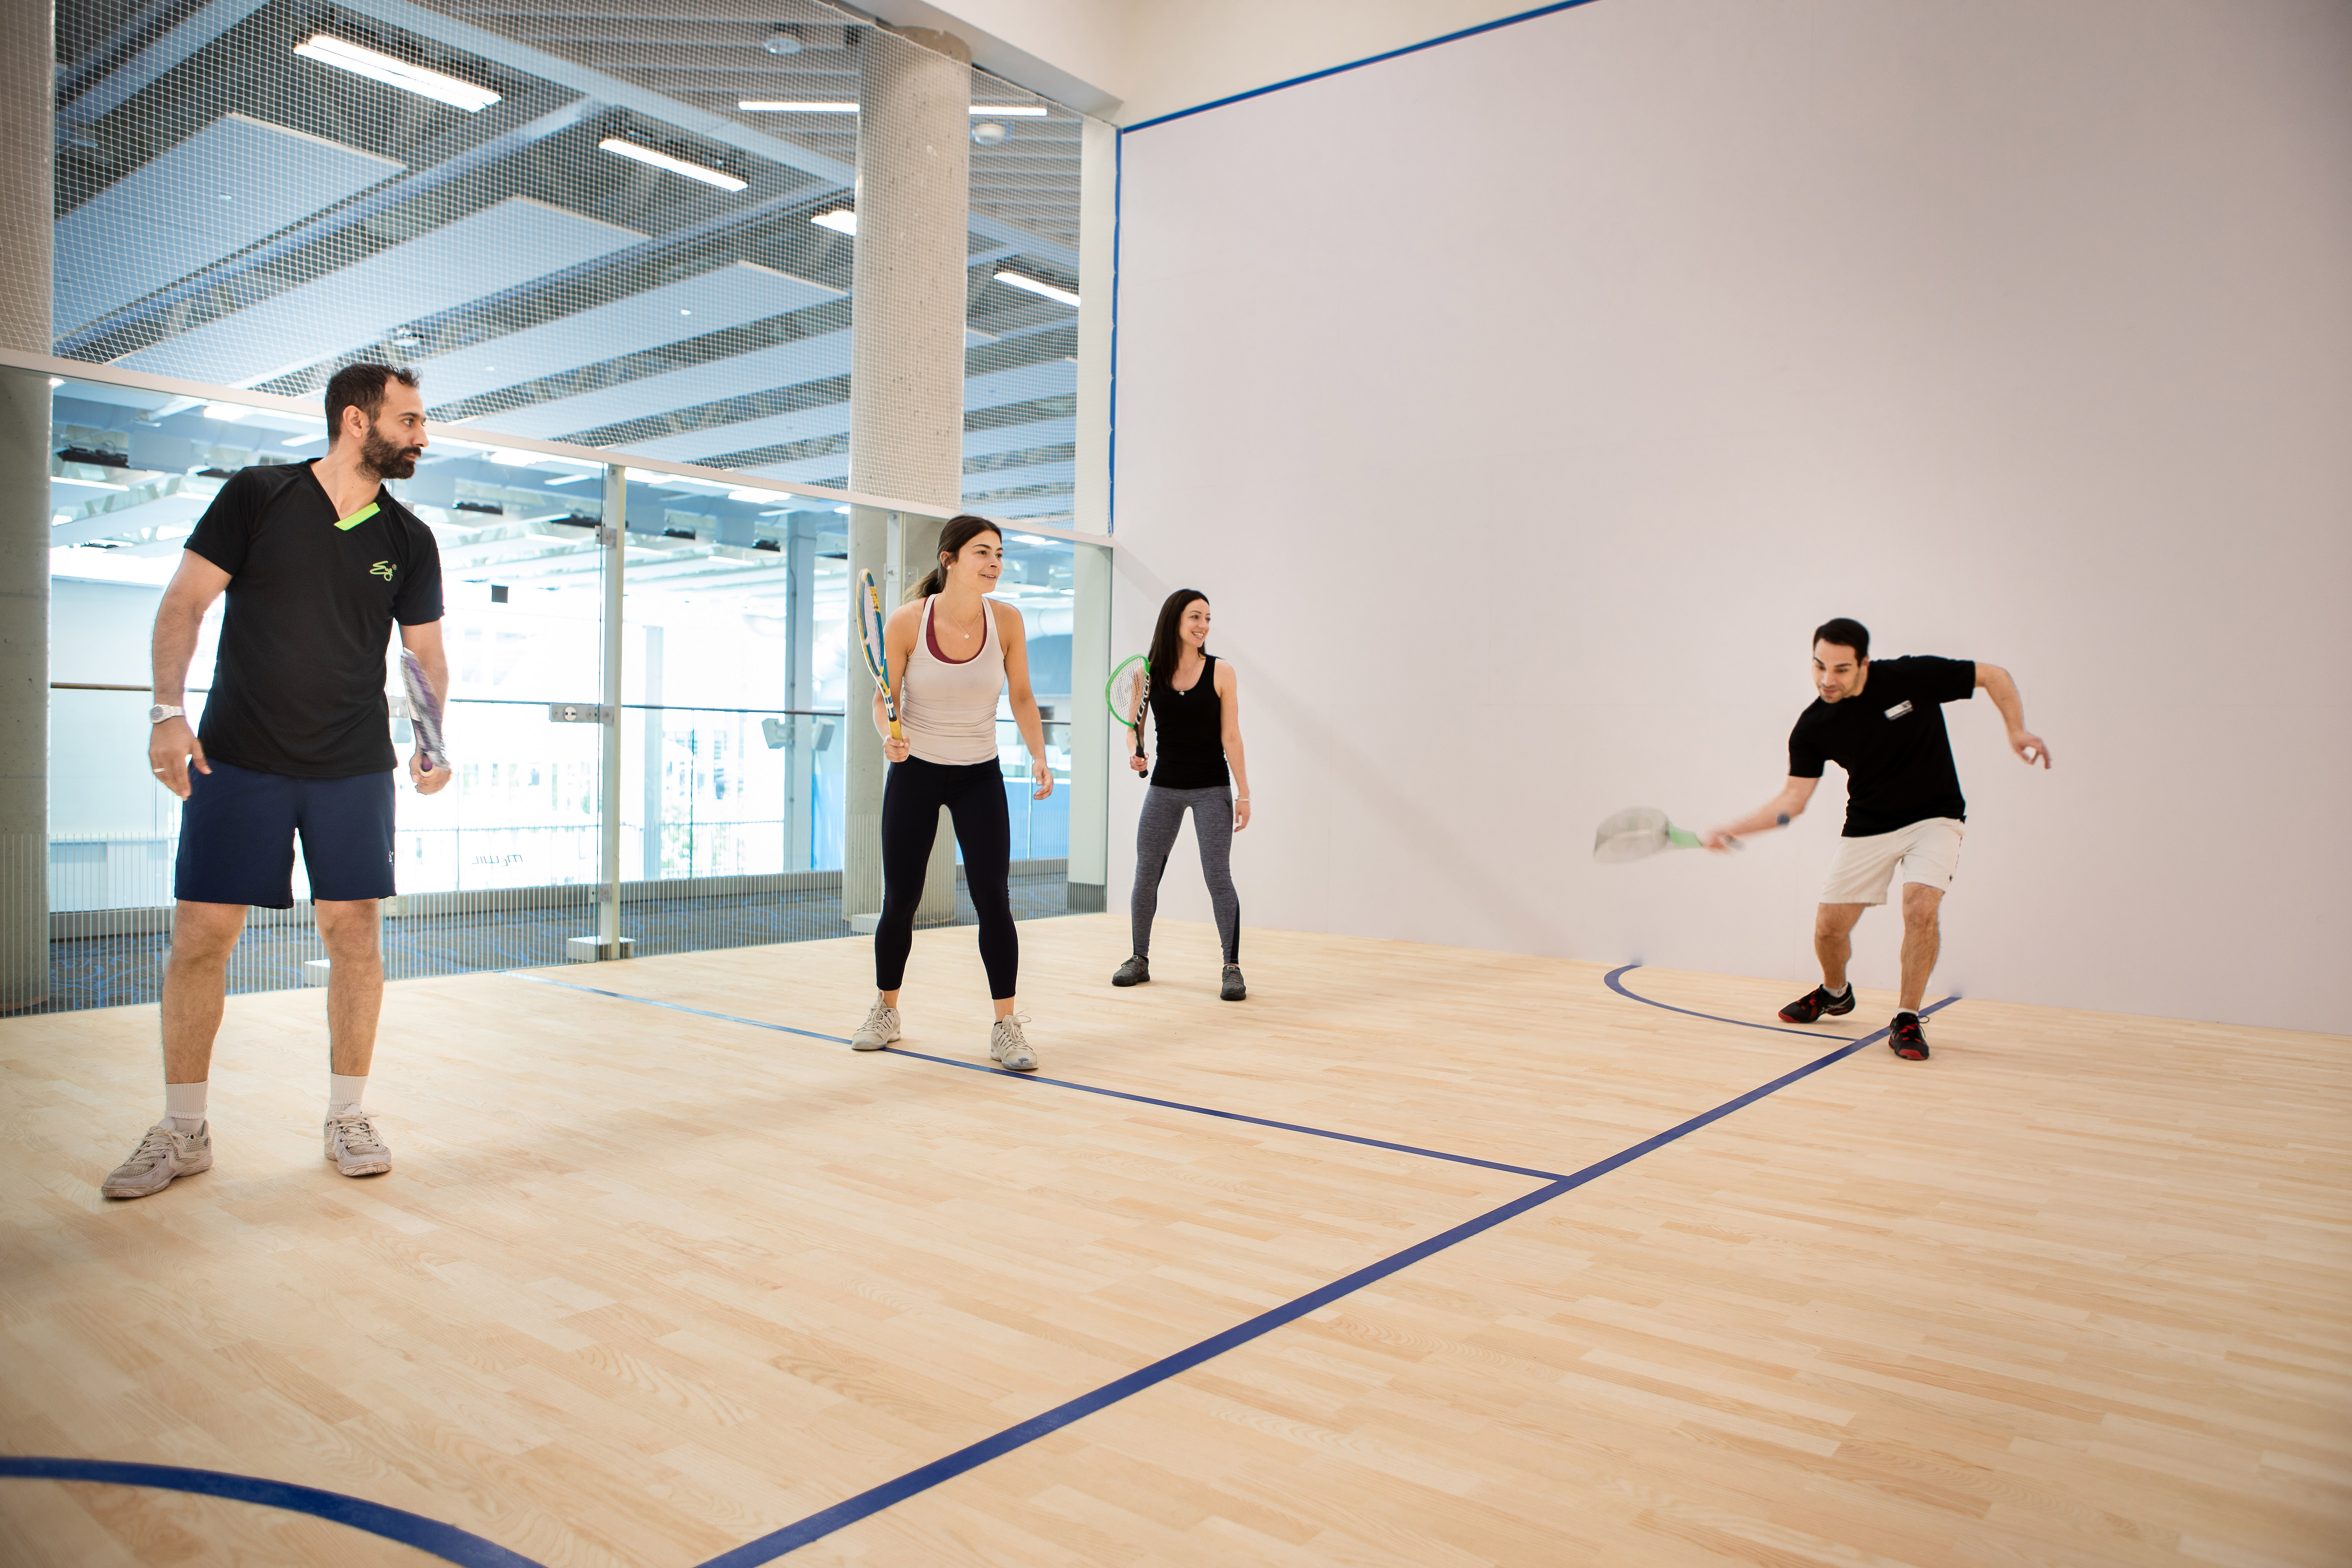 4 people playing squash on a court